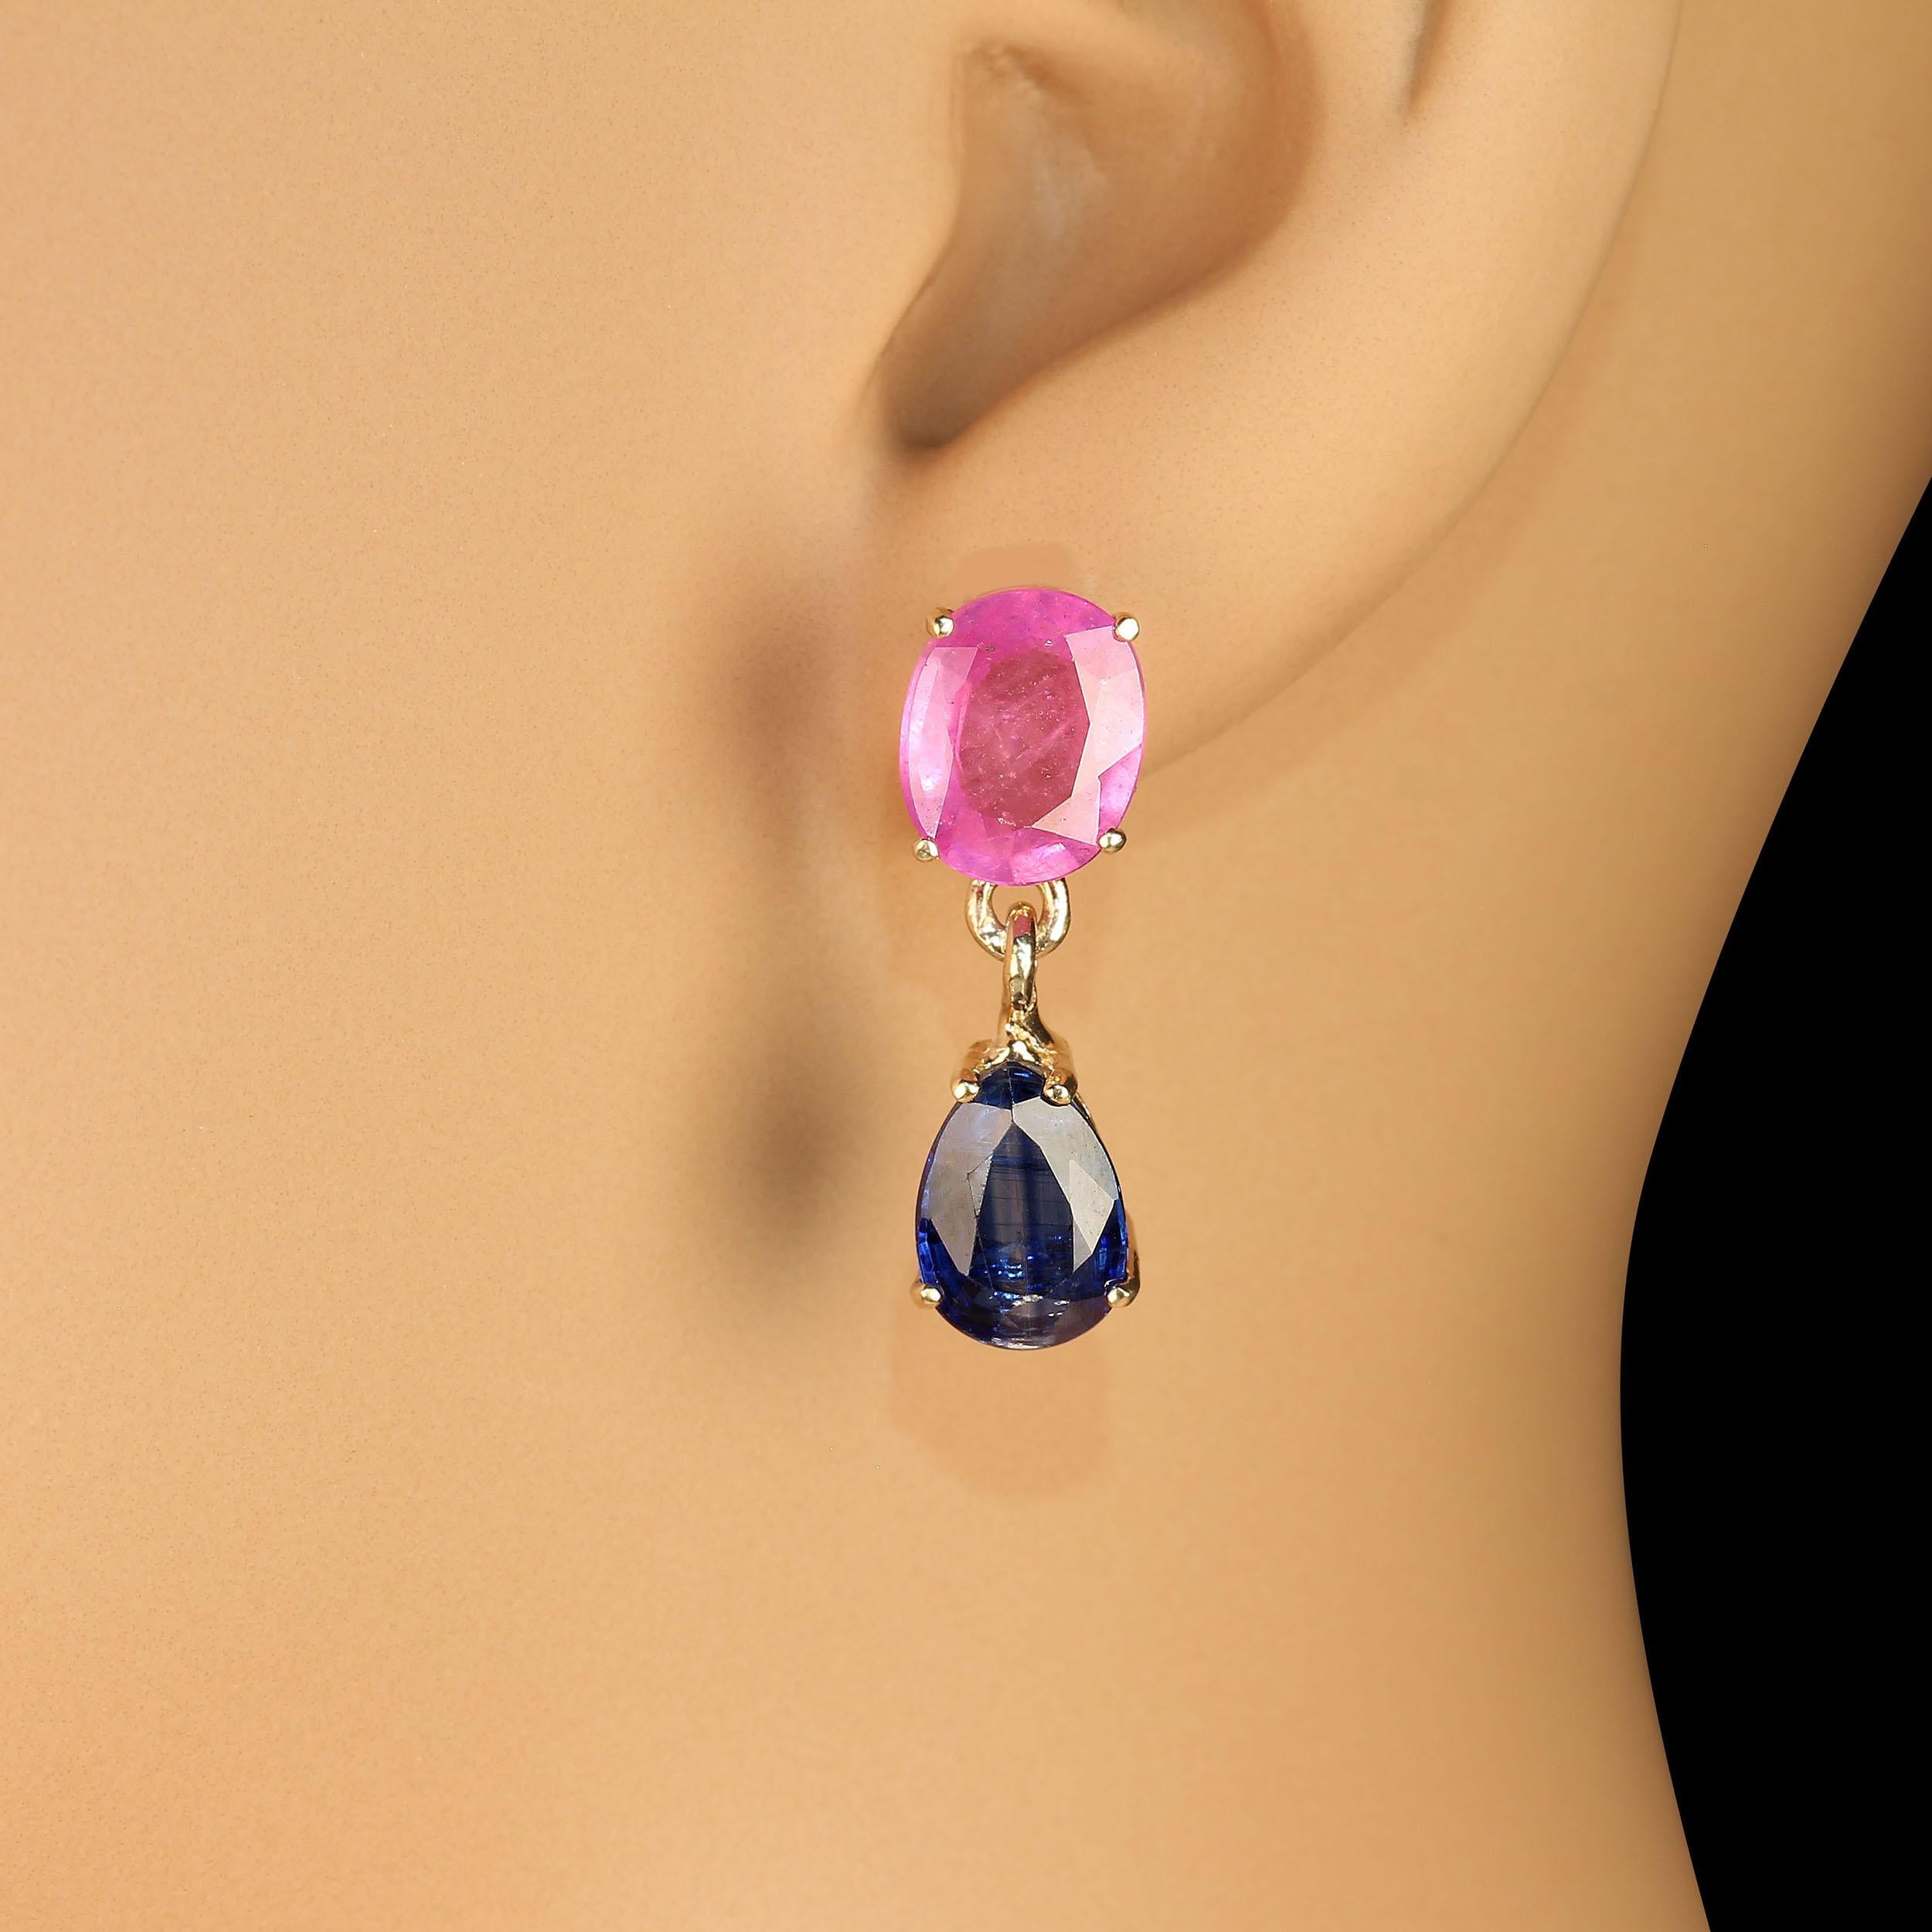 Lovely Dangle Earrings of oval Pink Sapphires, 6.64ct, with posts and pear shaped blue Kyanites, 4.02ct, dangles. We've set these gorgeous gemstones in handmade 14K rich yellow gold. These beryllium treated Sapphires are super hot pink!  Wear these